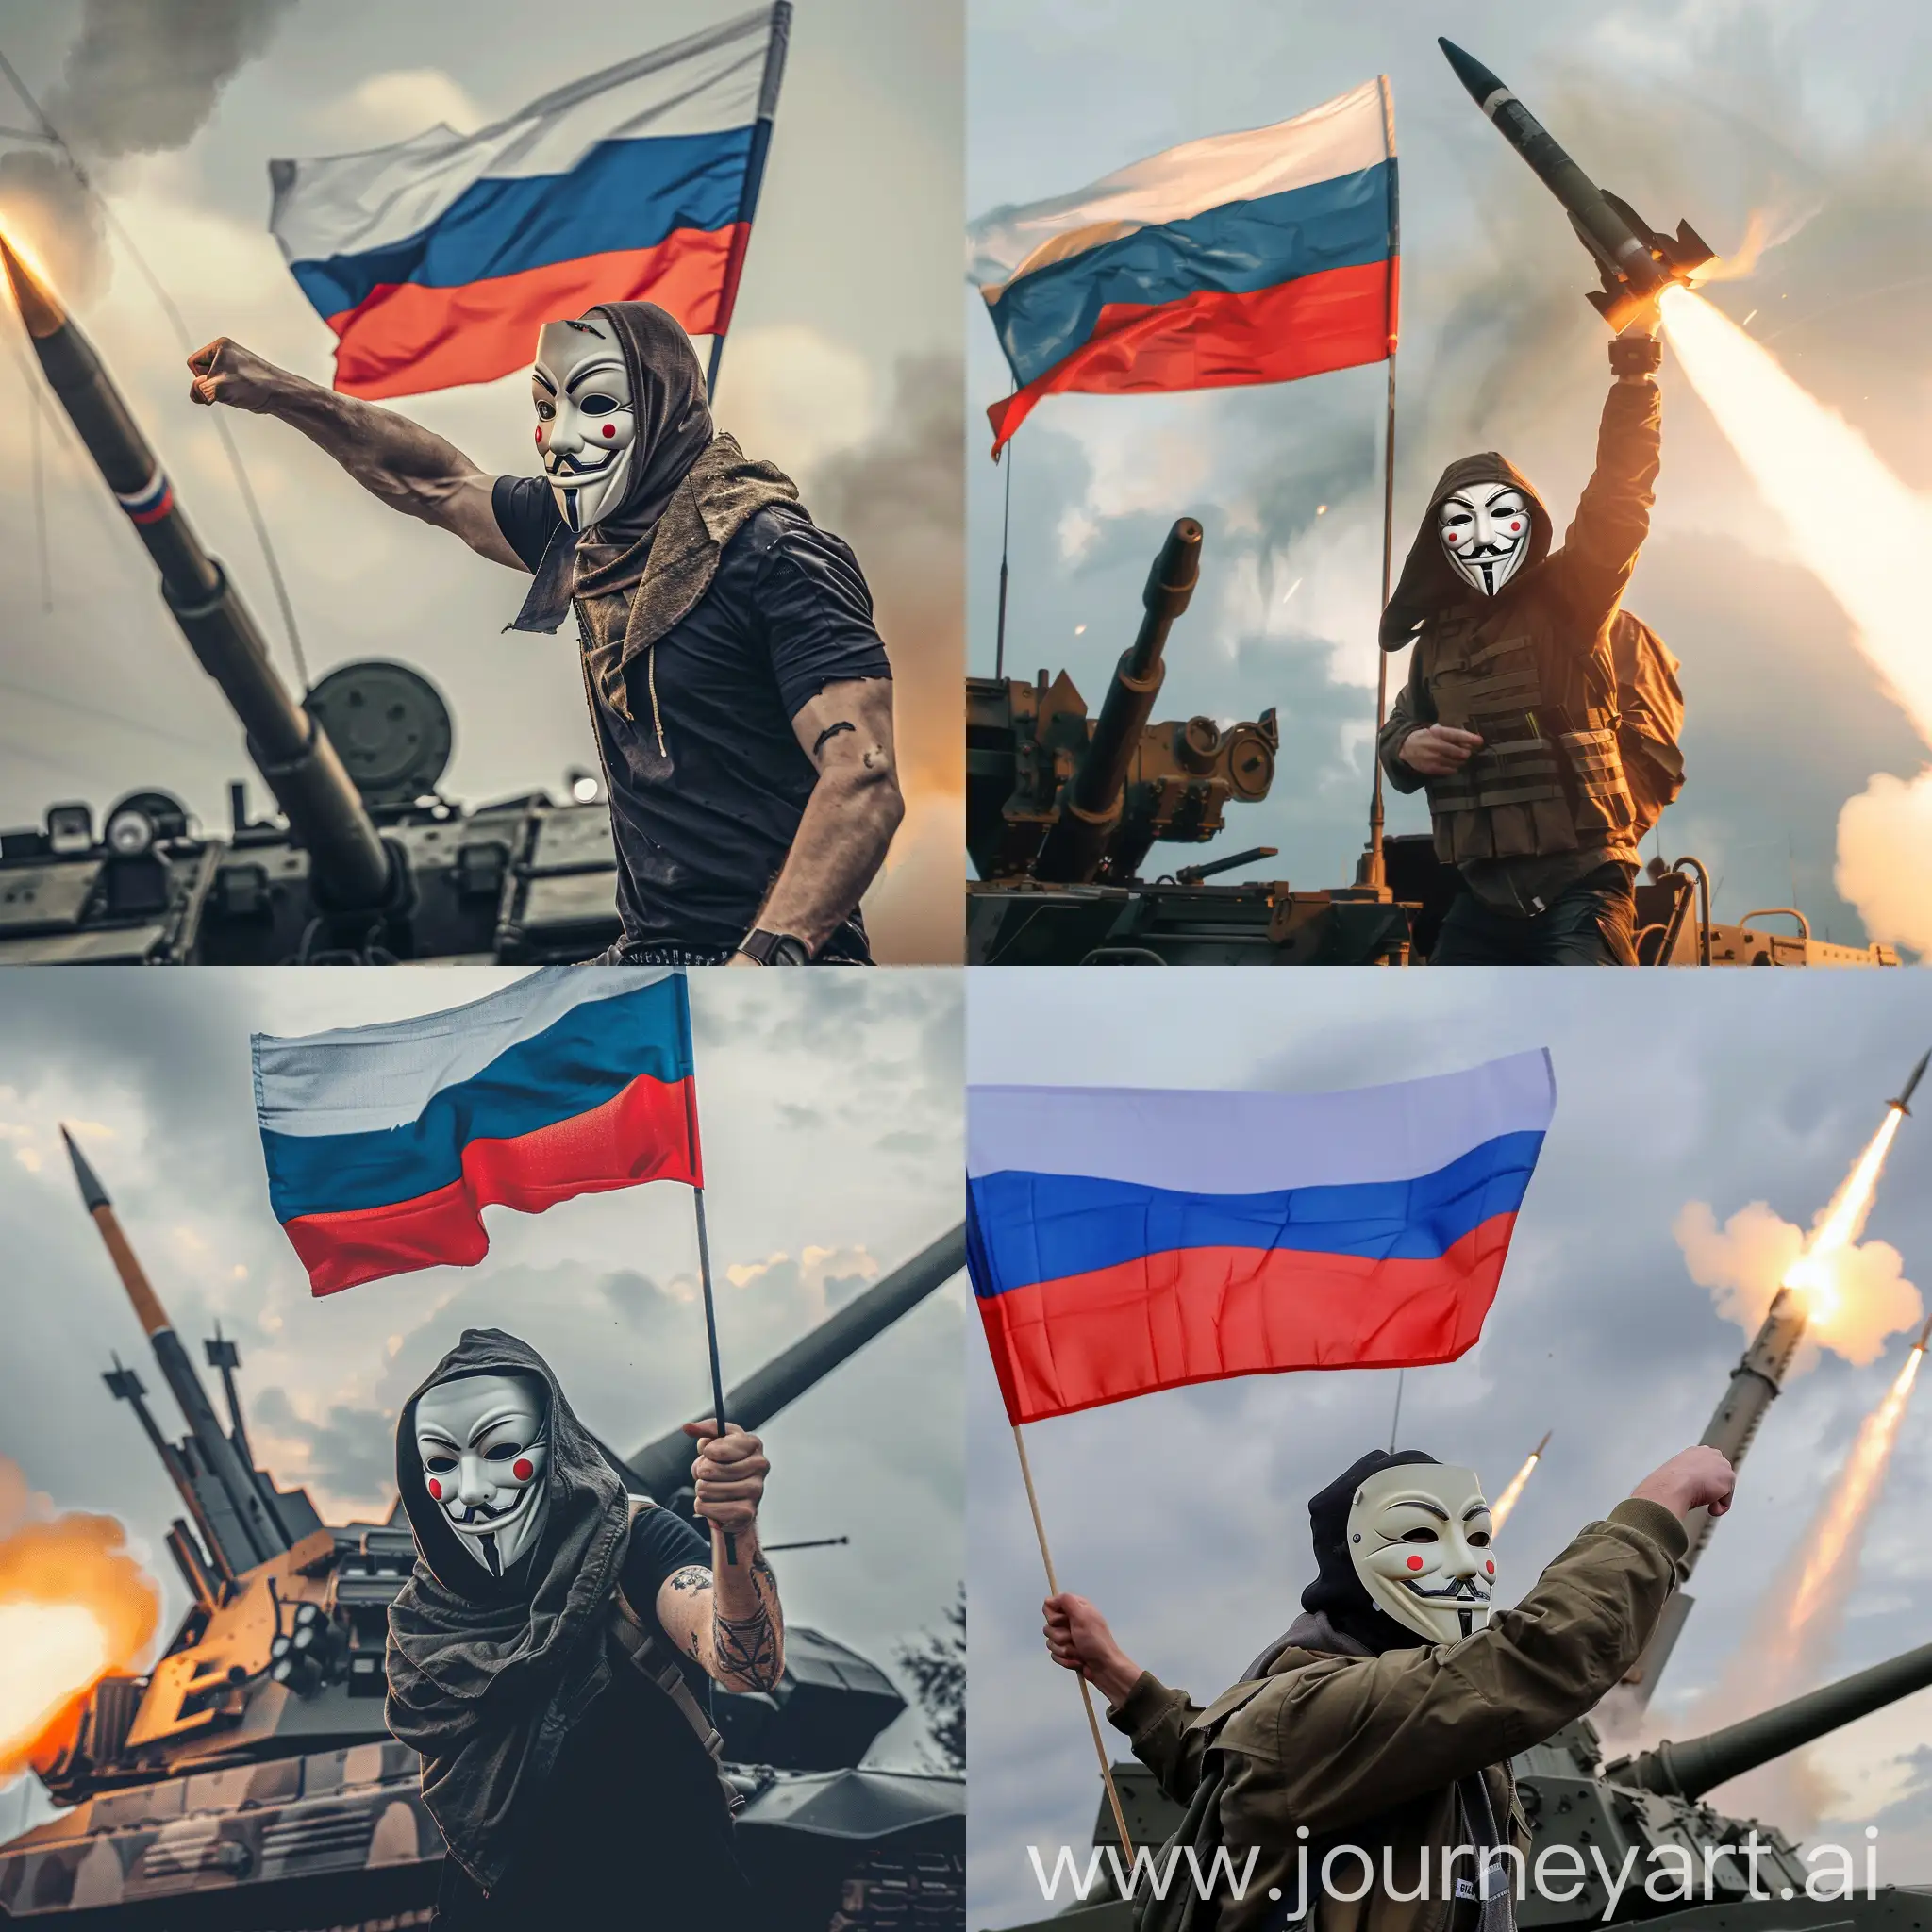 A man in an Anonymous mask with a Russian flag in his hands, launches missiles from the Grad MLRS against the background